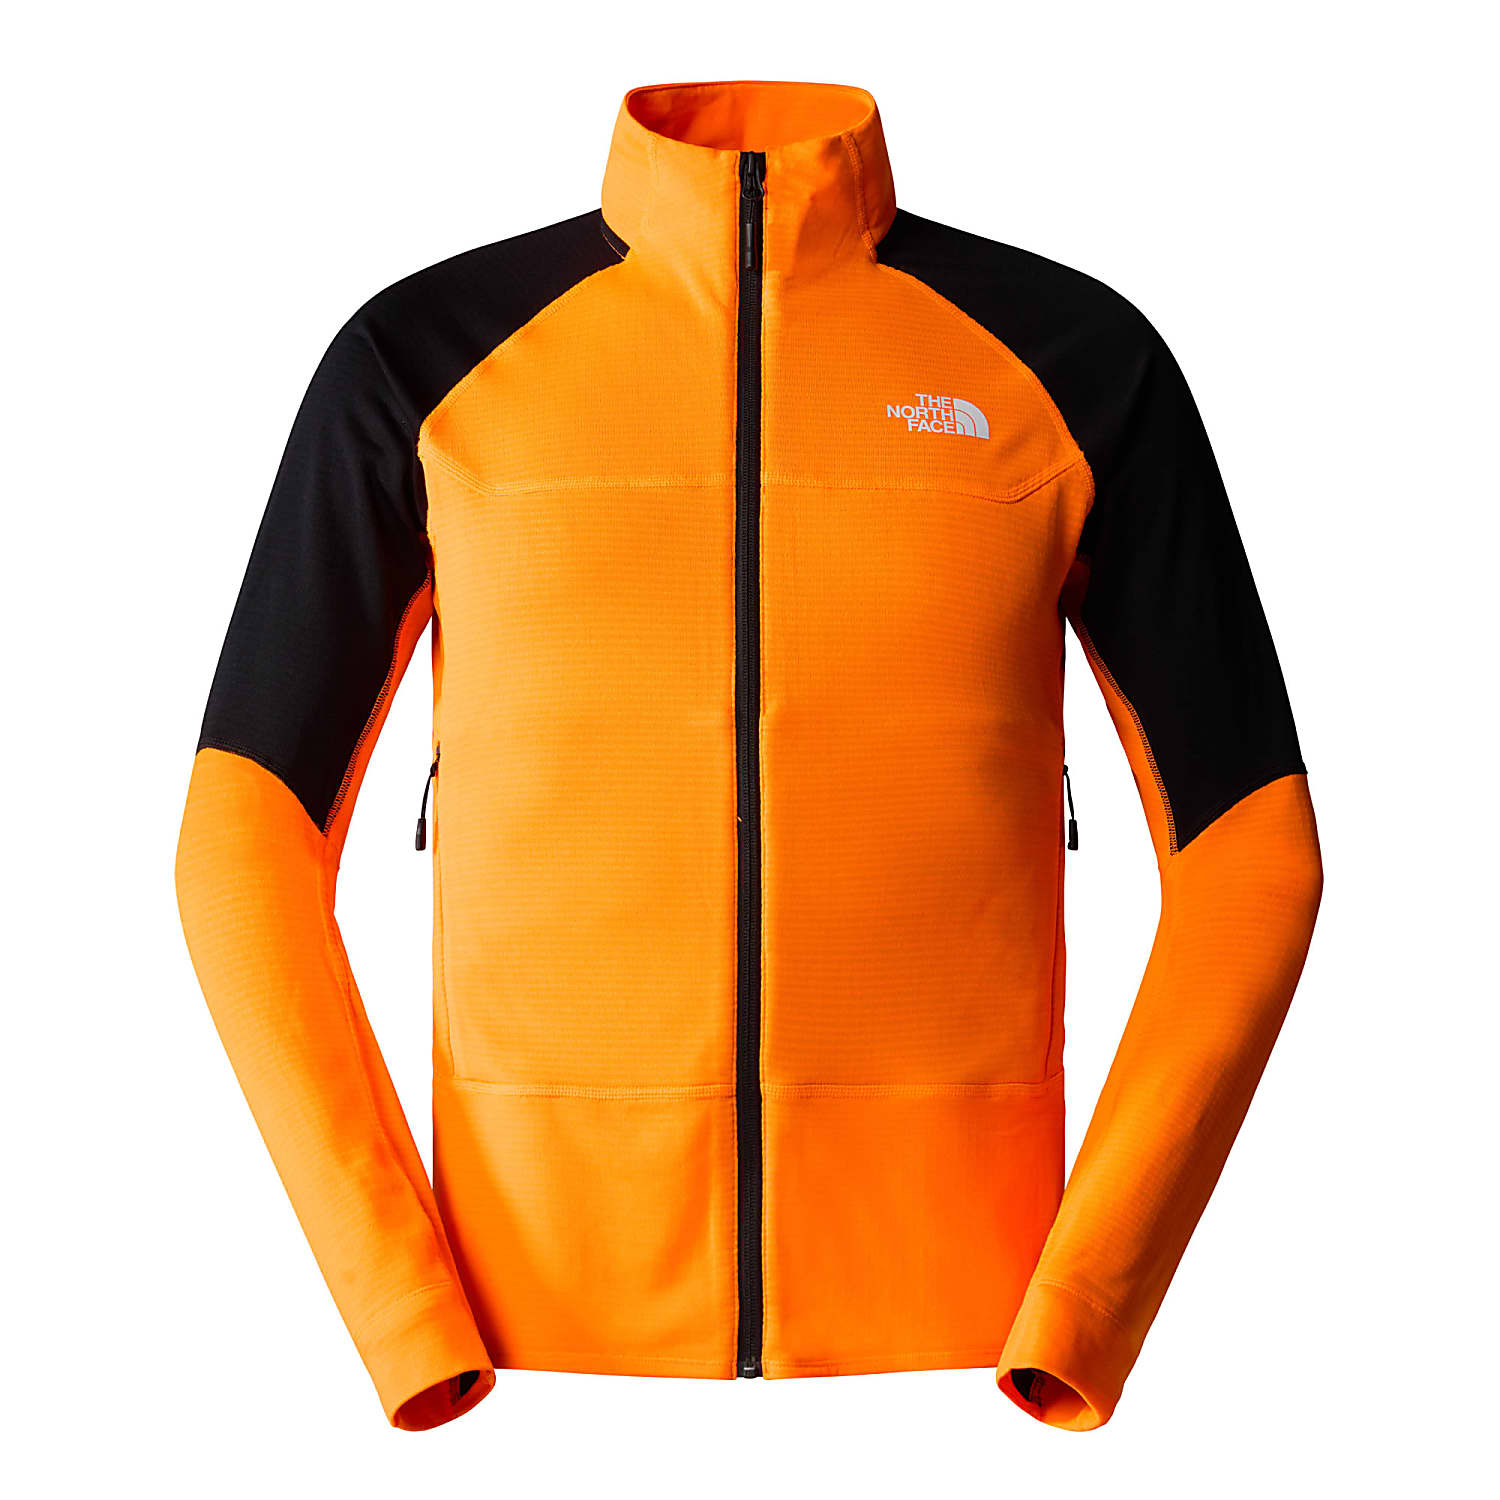 M - and Shocking cheap TNF Face Fast The JACKET, BOLT Black shipping - North Orange POLARTEC